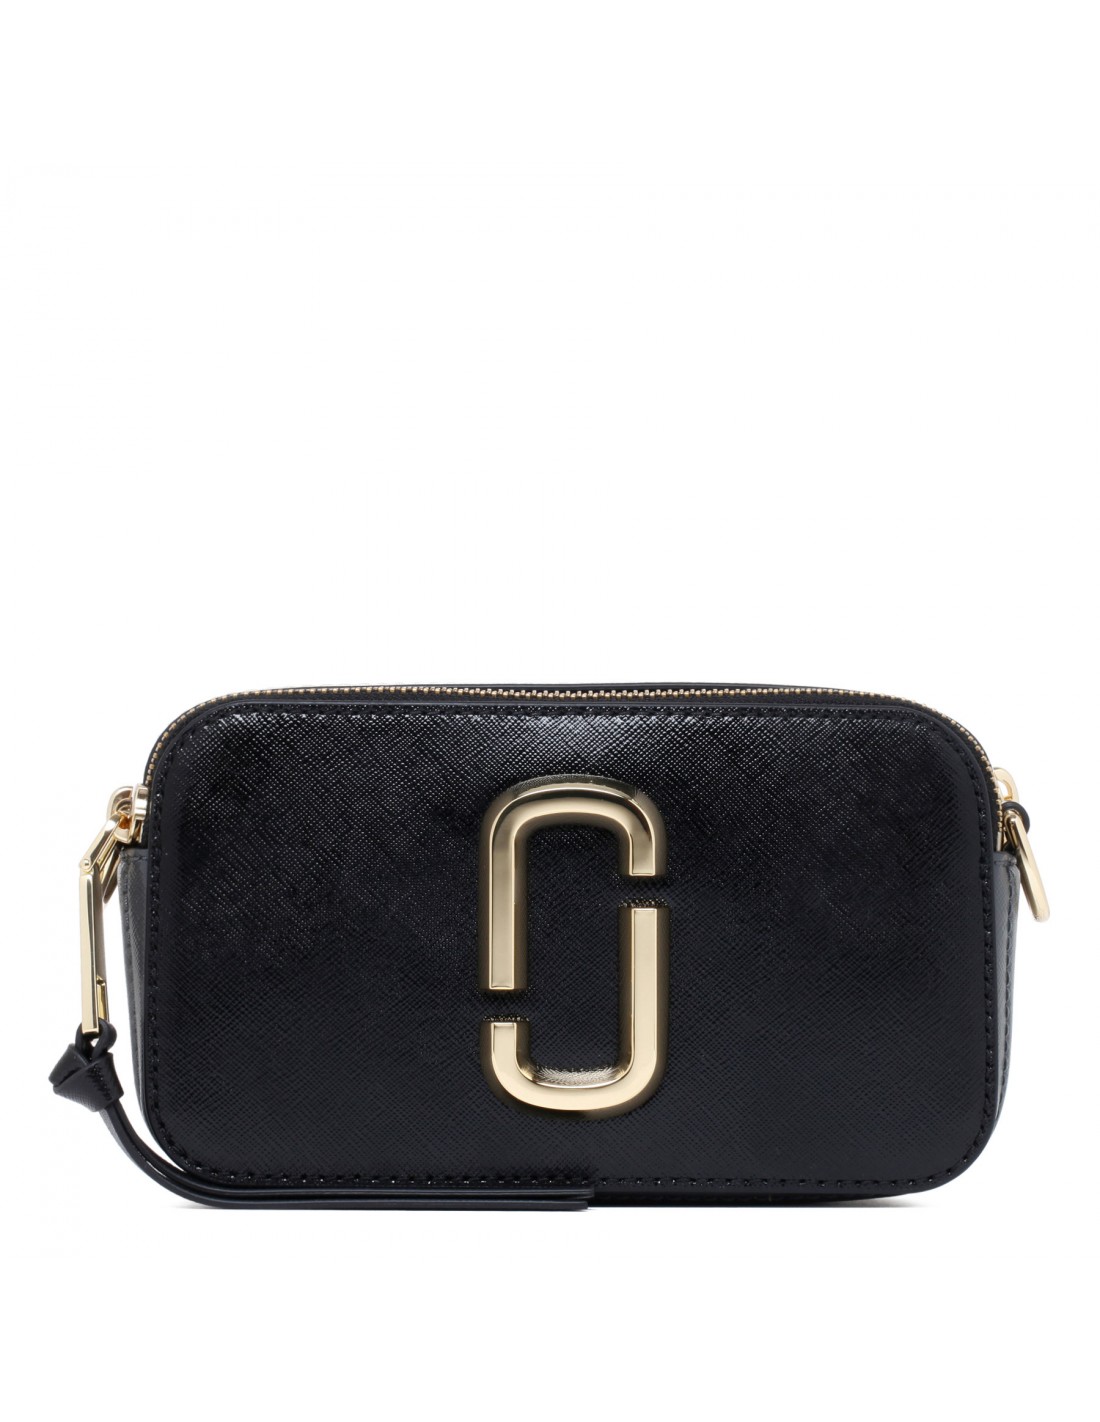 Marc Jacobs Black Leather Mini Wallet on Strap. Made in Vietnam.